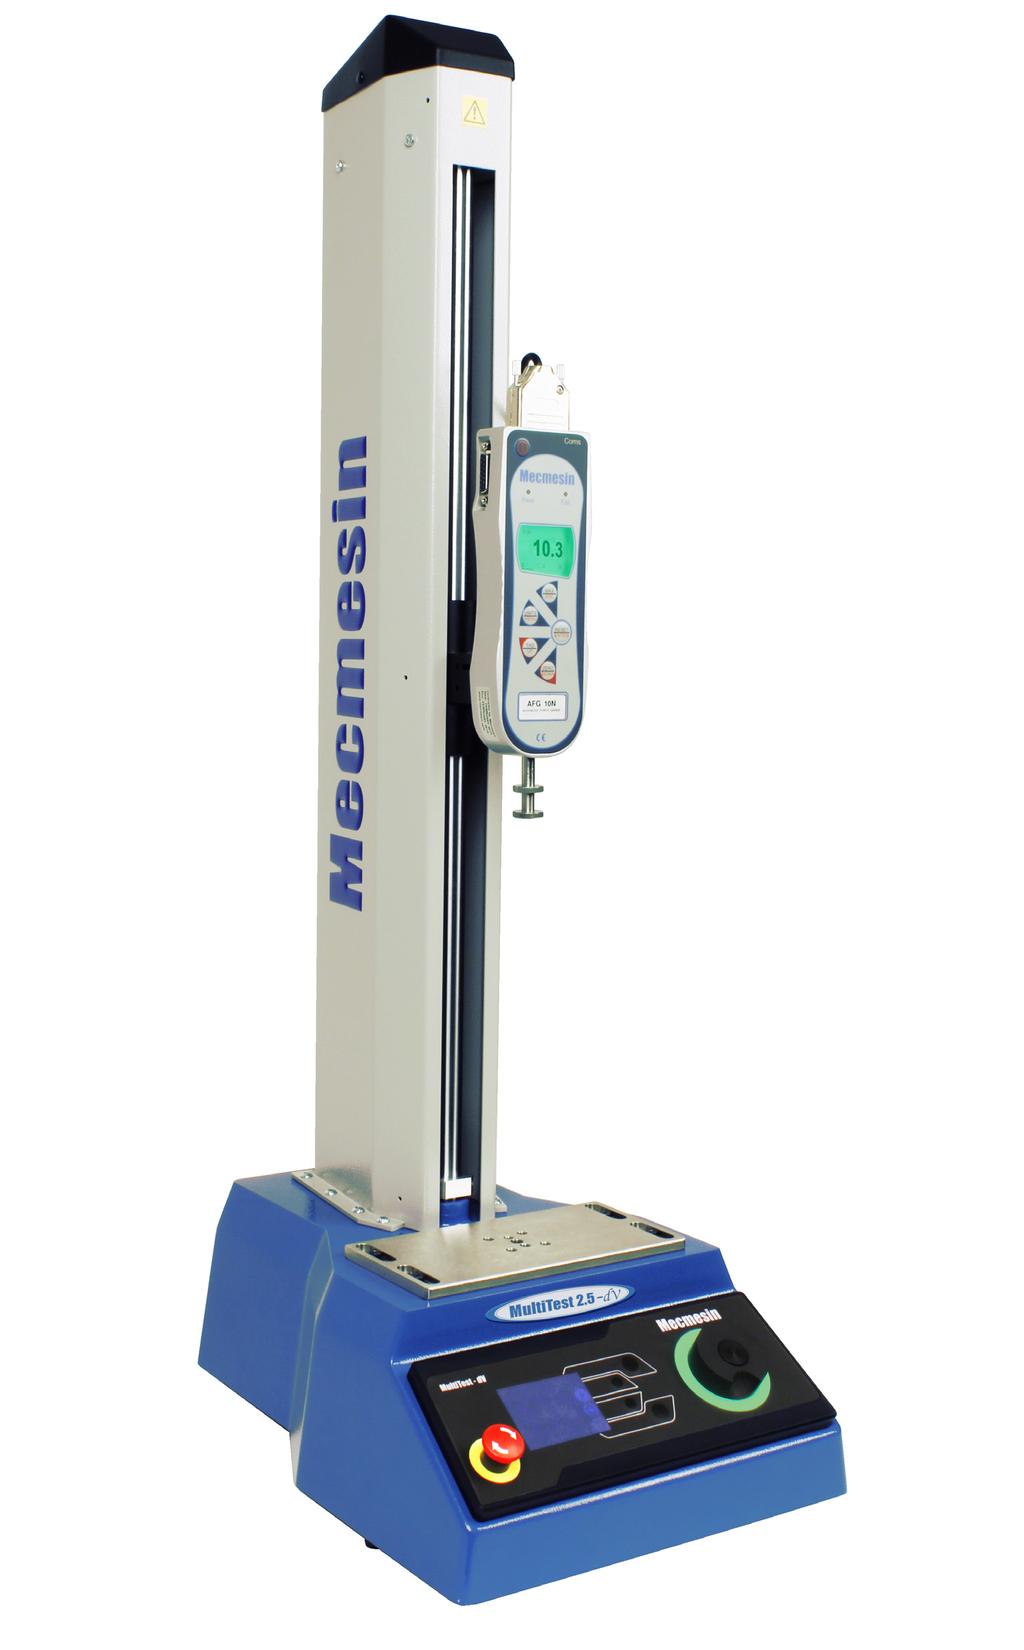 Designed for precision compression and tension testing, its simple controls, backed by sophisticated electronics, make it